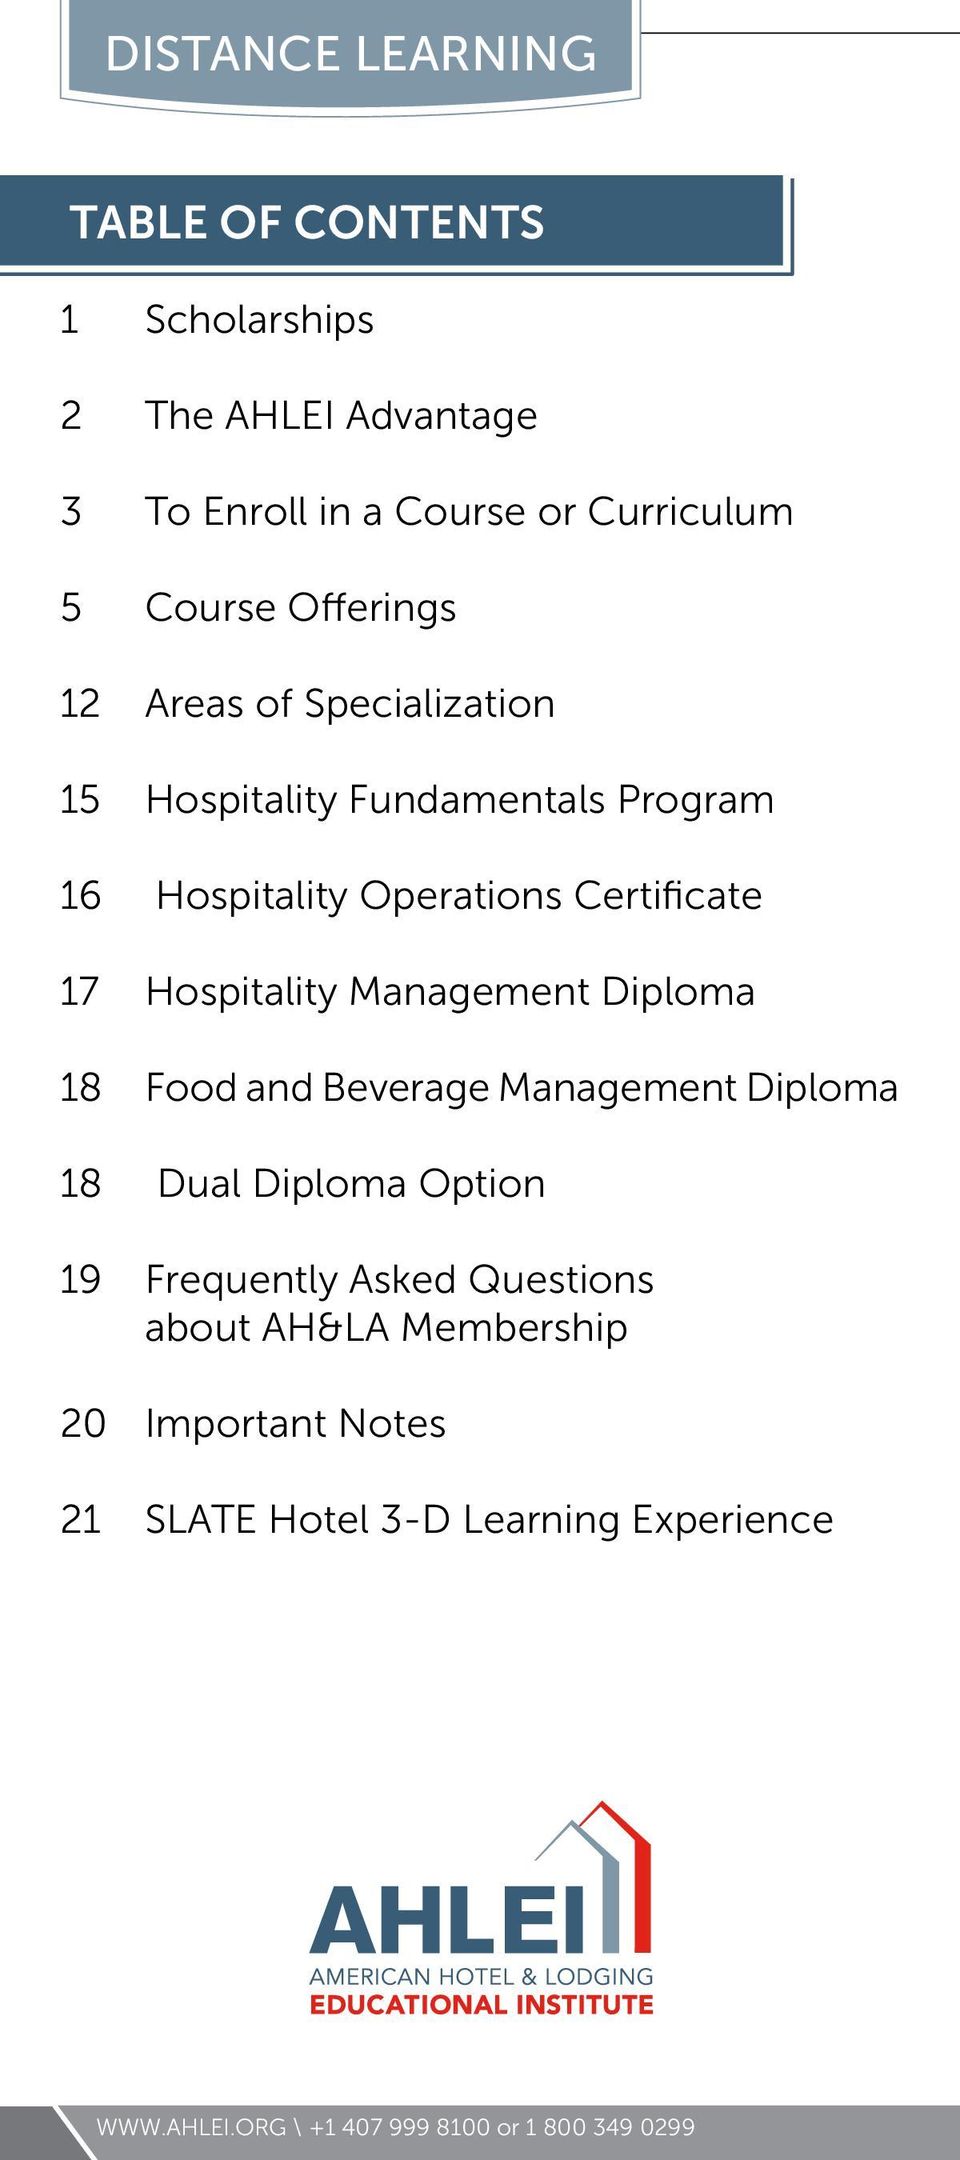 Management Diploma 18 Food and Beverage Management Diploma 18 Dual Diploma Option 19 Frequently Asked Questions